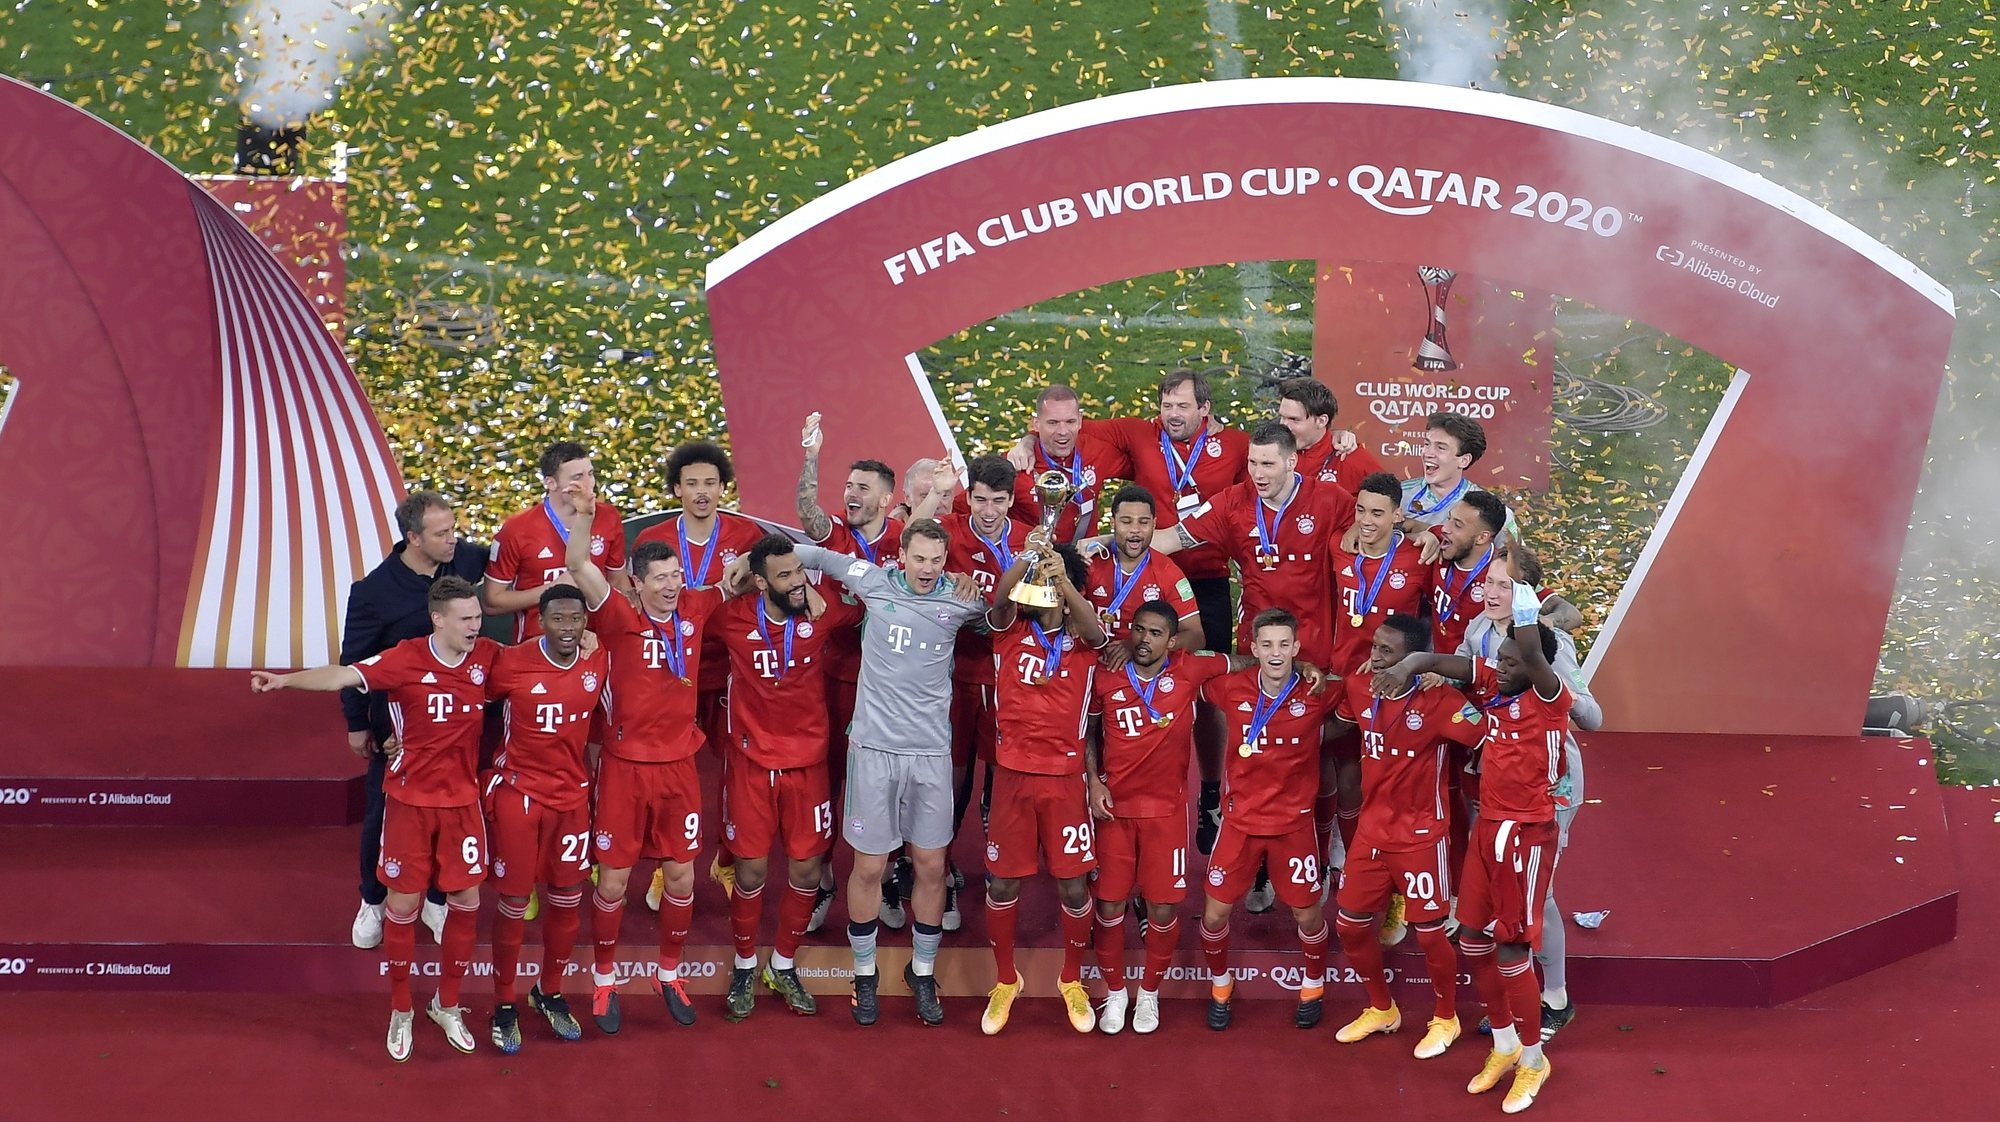 epa09005297 Bayern Munich players celebrate with the Club World Cup trophy after winning the final soccer match between Bayern Munich and Tigres UANL at the FIFA Club World Cup in Al Rayyan, Qatar, 11 February 2021.  EPA/NOUSHAD THEKKAYIL